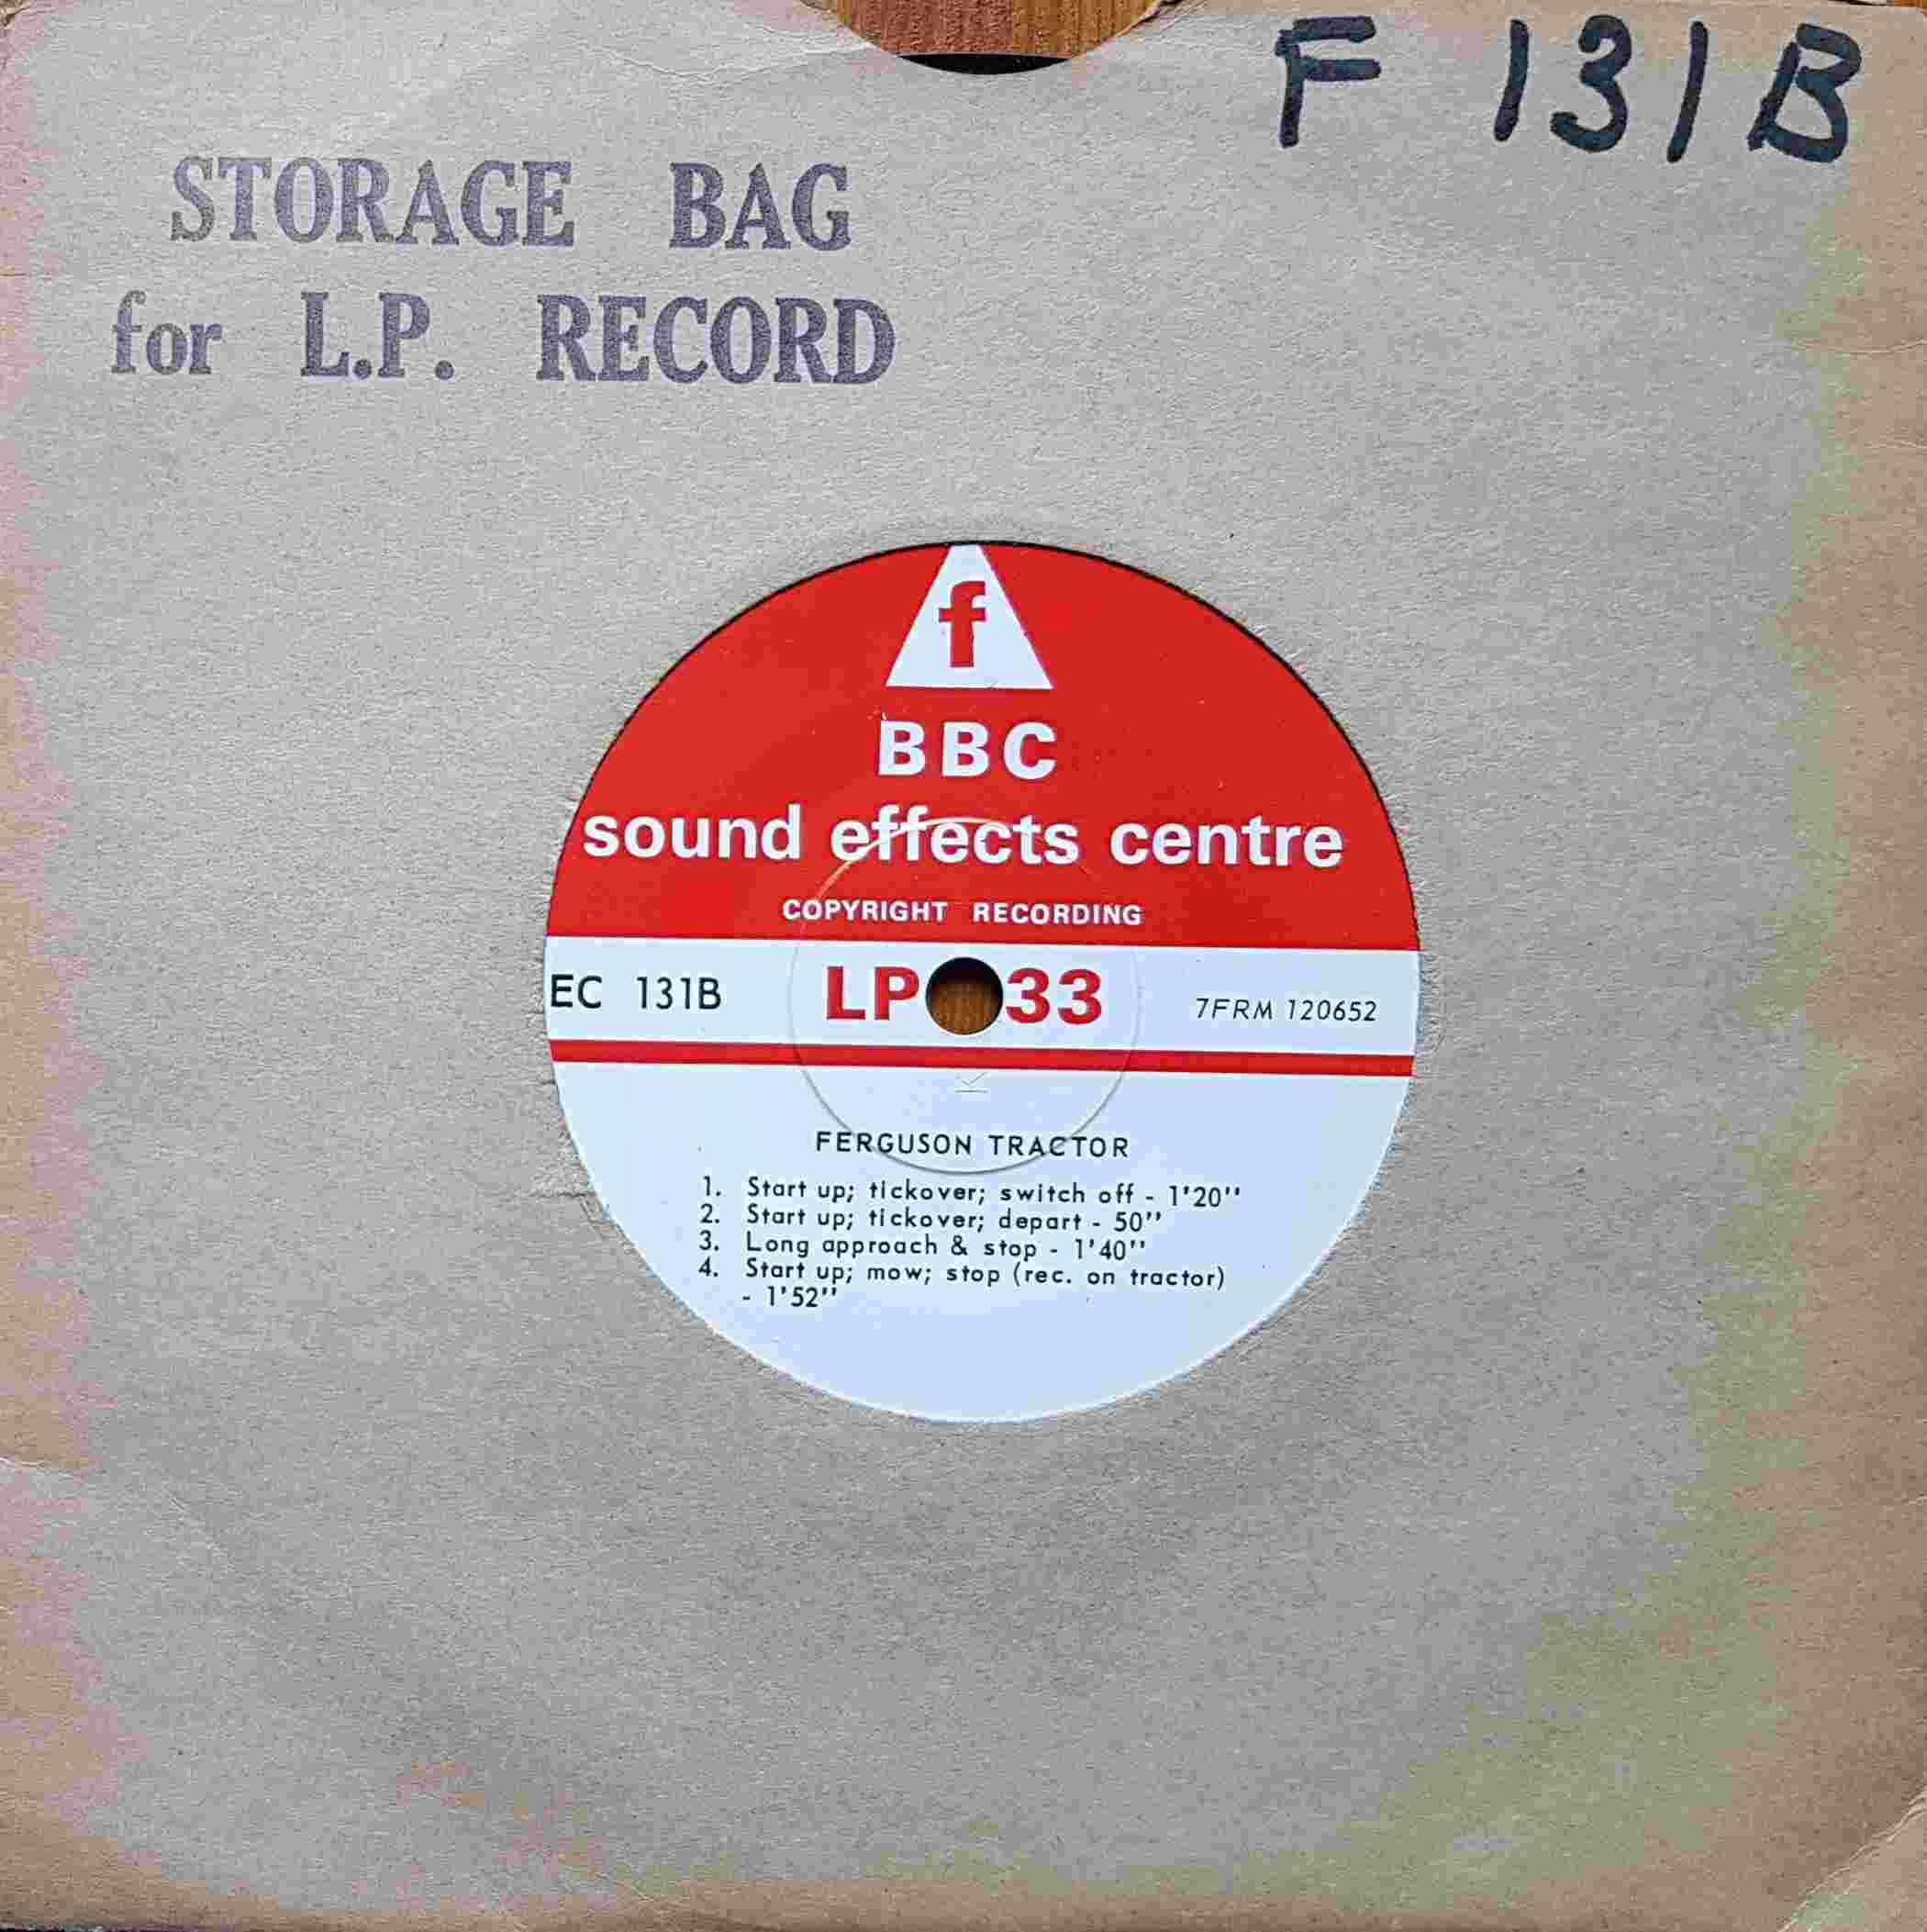 Picture of EC 131B Ferguson tractor by artist Not registered from the BBC records and Tapes library